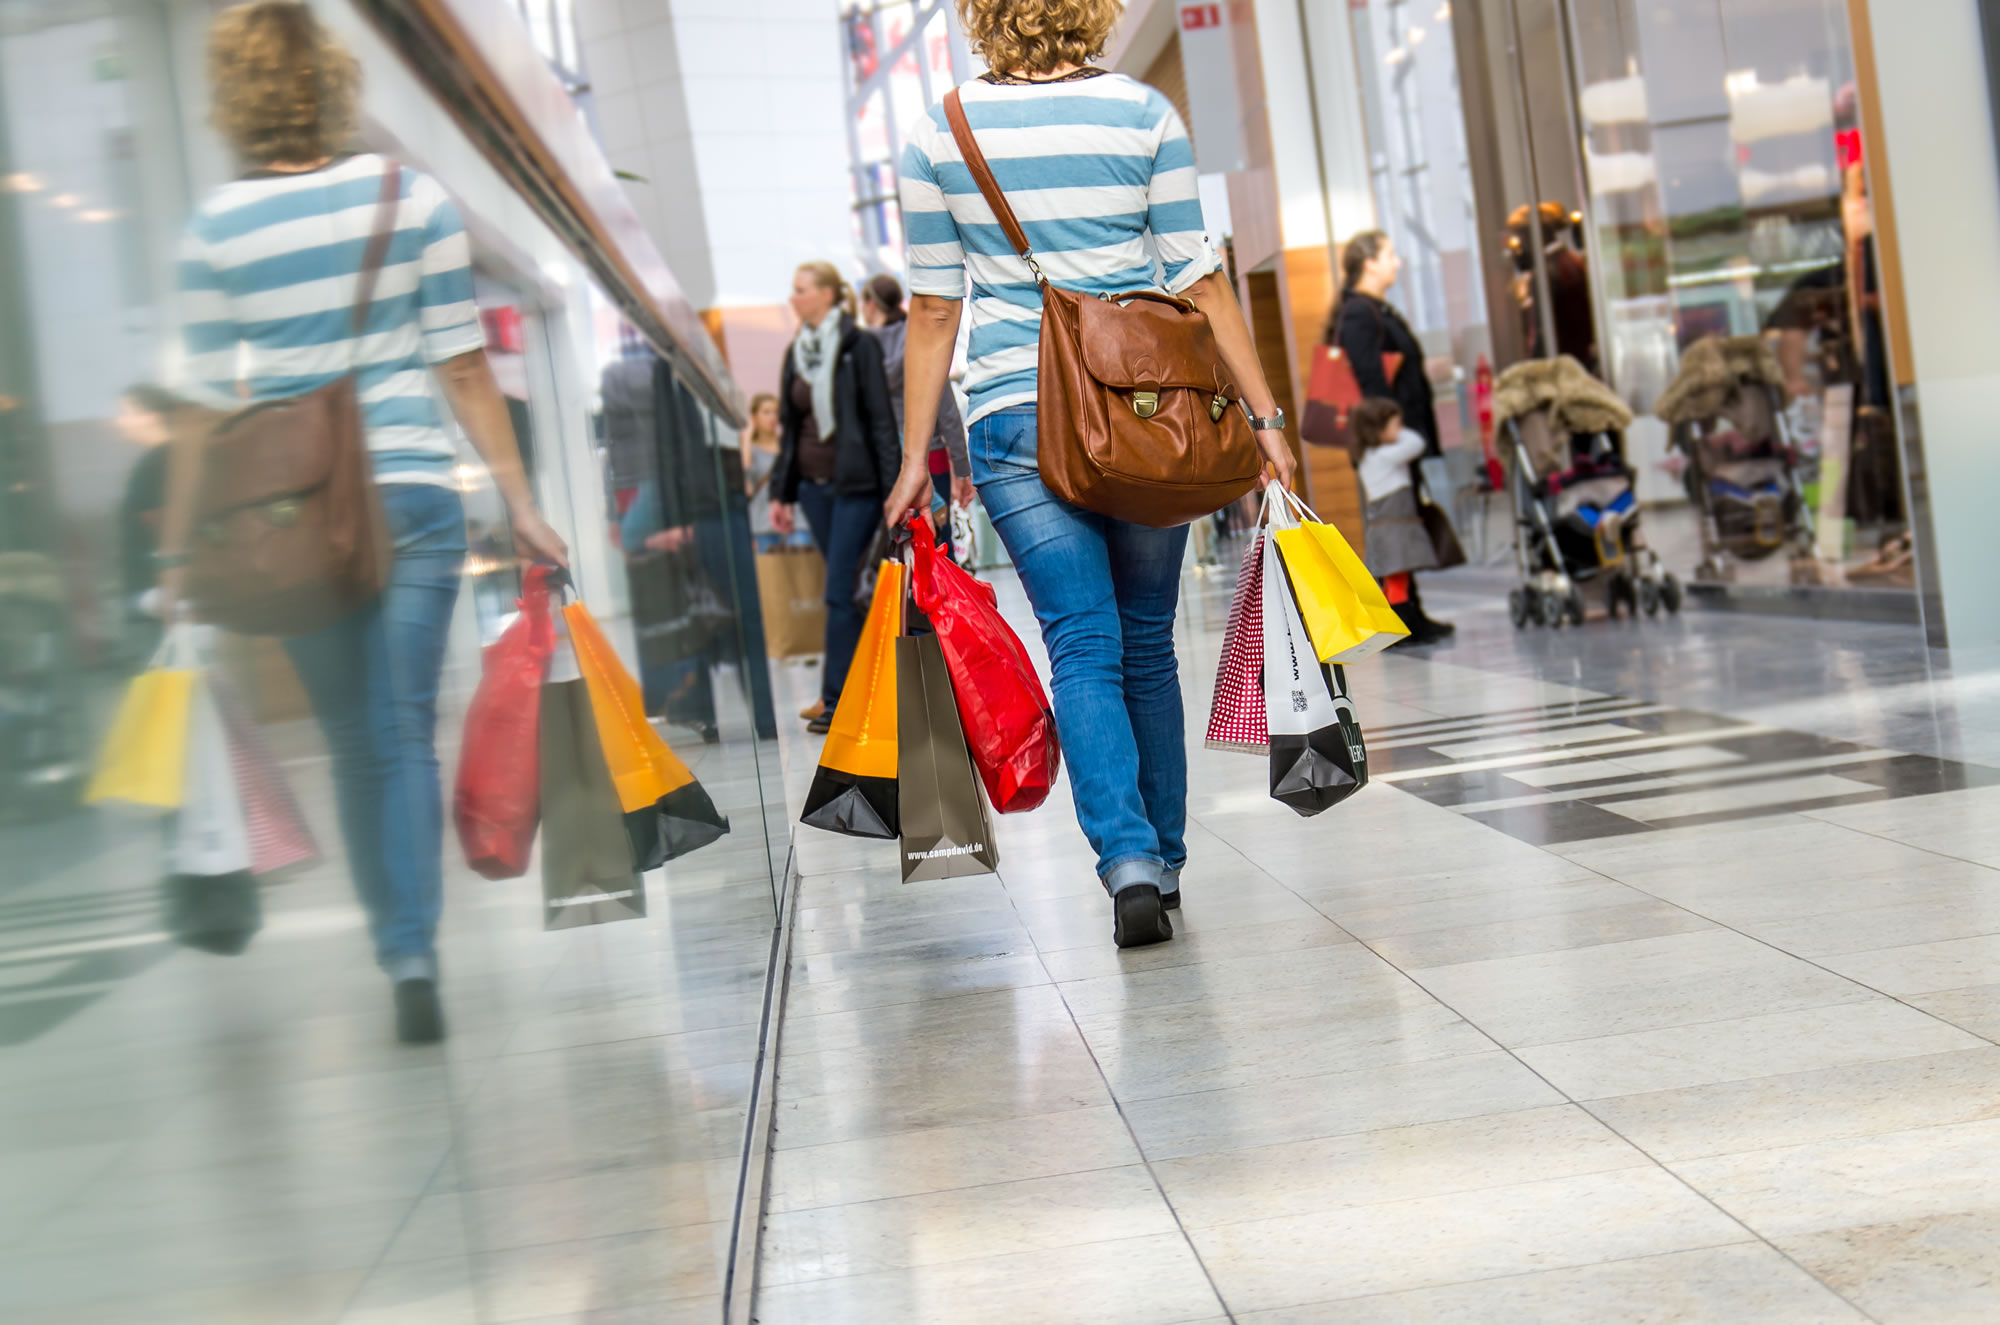 Shopping Accident, Slip compensation Manchester, Public liability claims, fall in supermarket claim